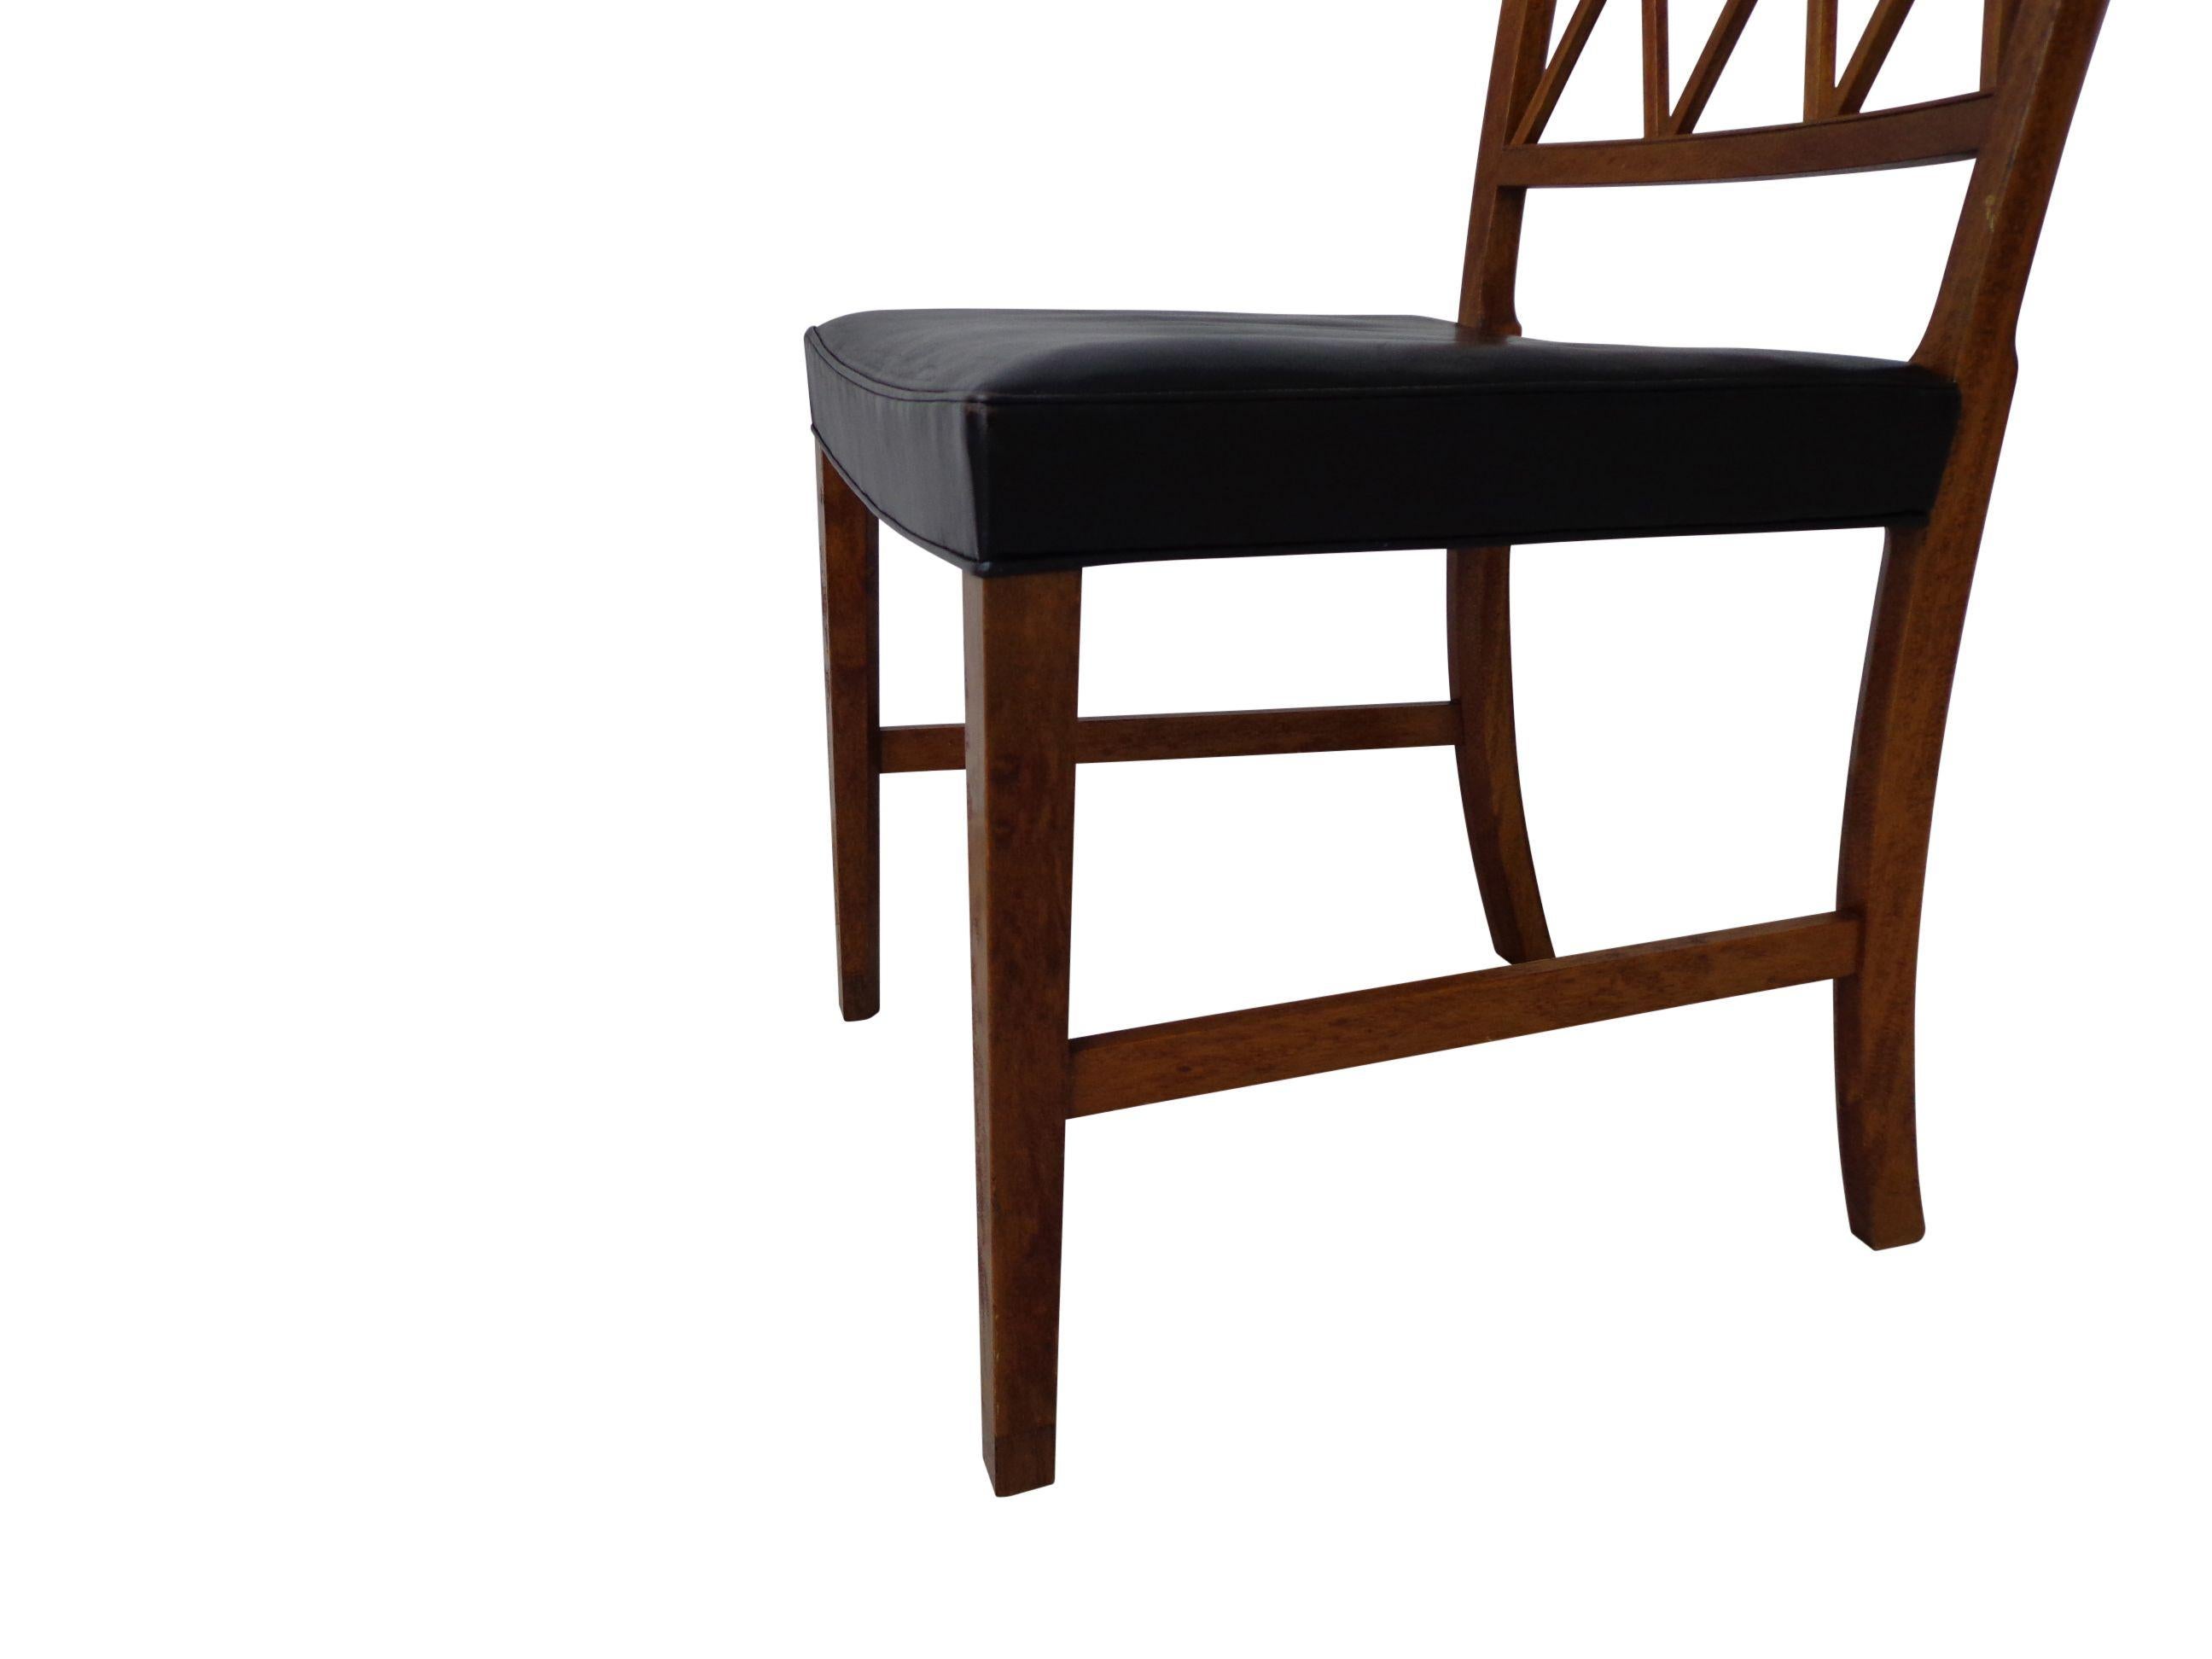 Ole Wanscher Dining Chairs by Cabinetmaker A.J Iversen in Denmark 1940s For Sale 4